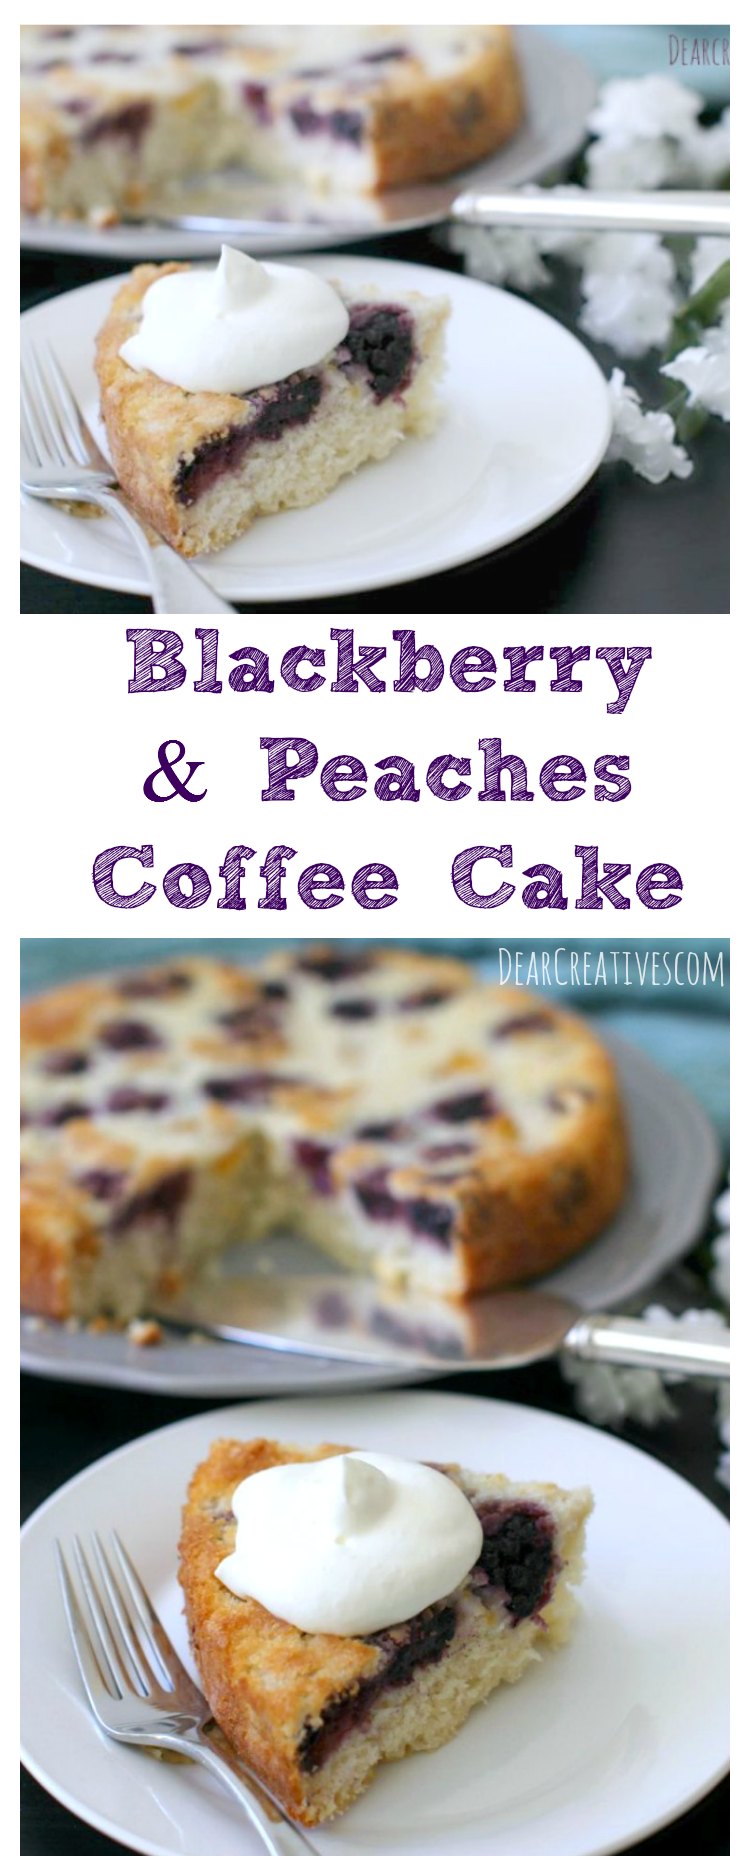 Cake Recipes Blackberries And Peaches Coffee Cake This cake recipe is a cross between a coffee cake and upside down cake. It's easy to make and pairs well with coffee, tea or iced tea